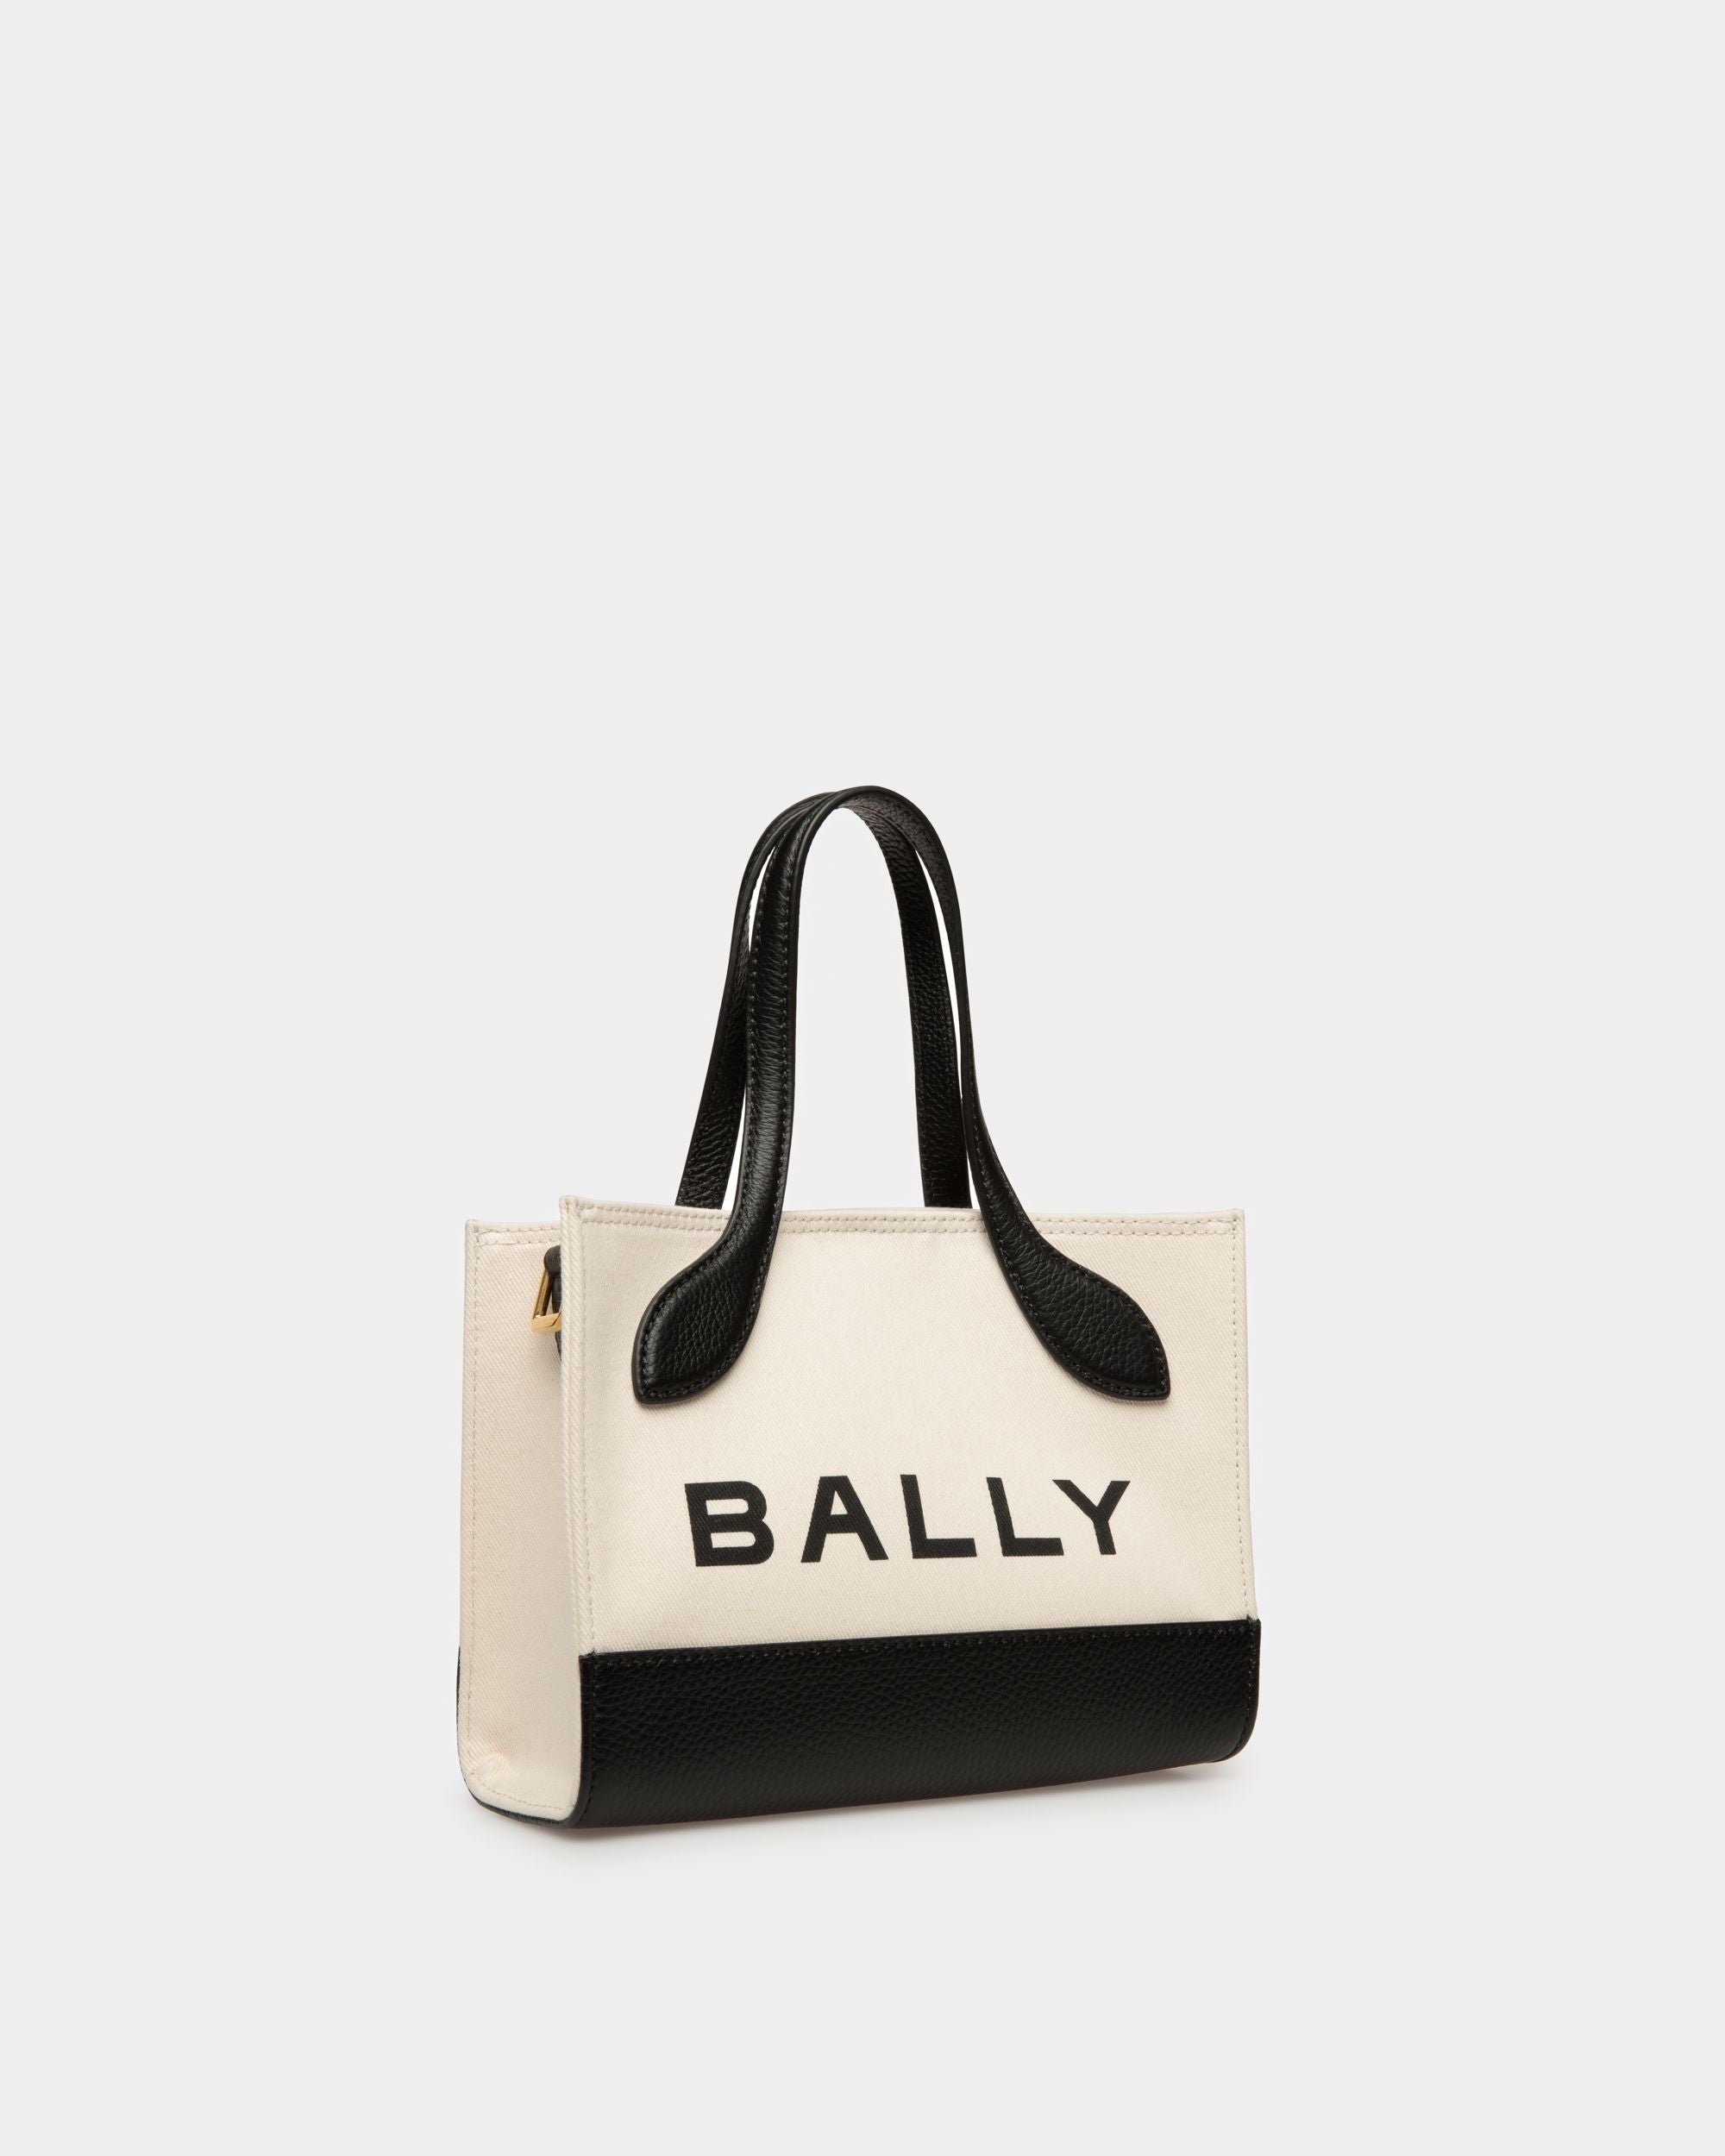 Keep On Extra Small | Women's Minibag | Natural And Black Fabric | Bally | Still Life 3/4 Front